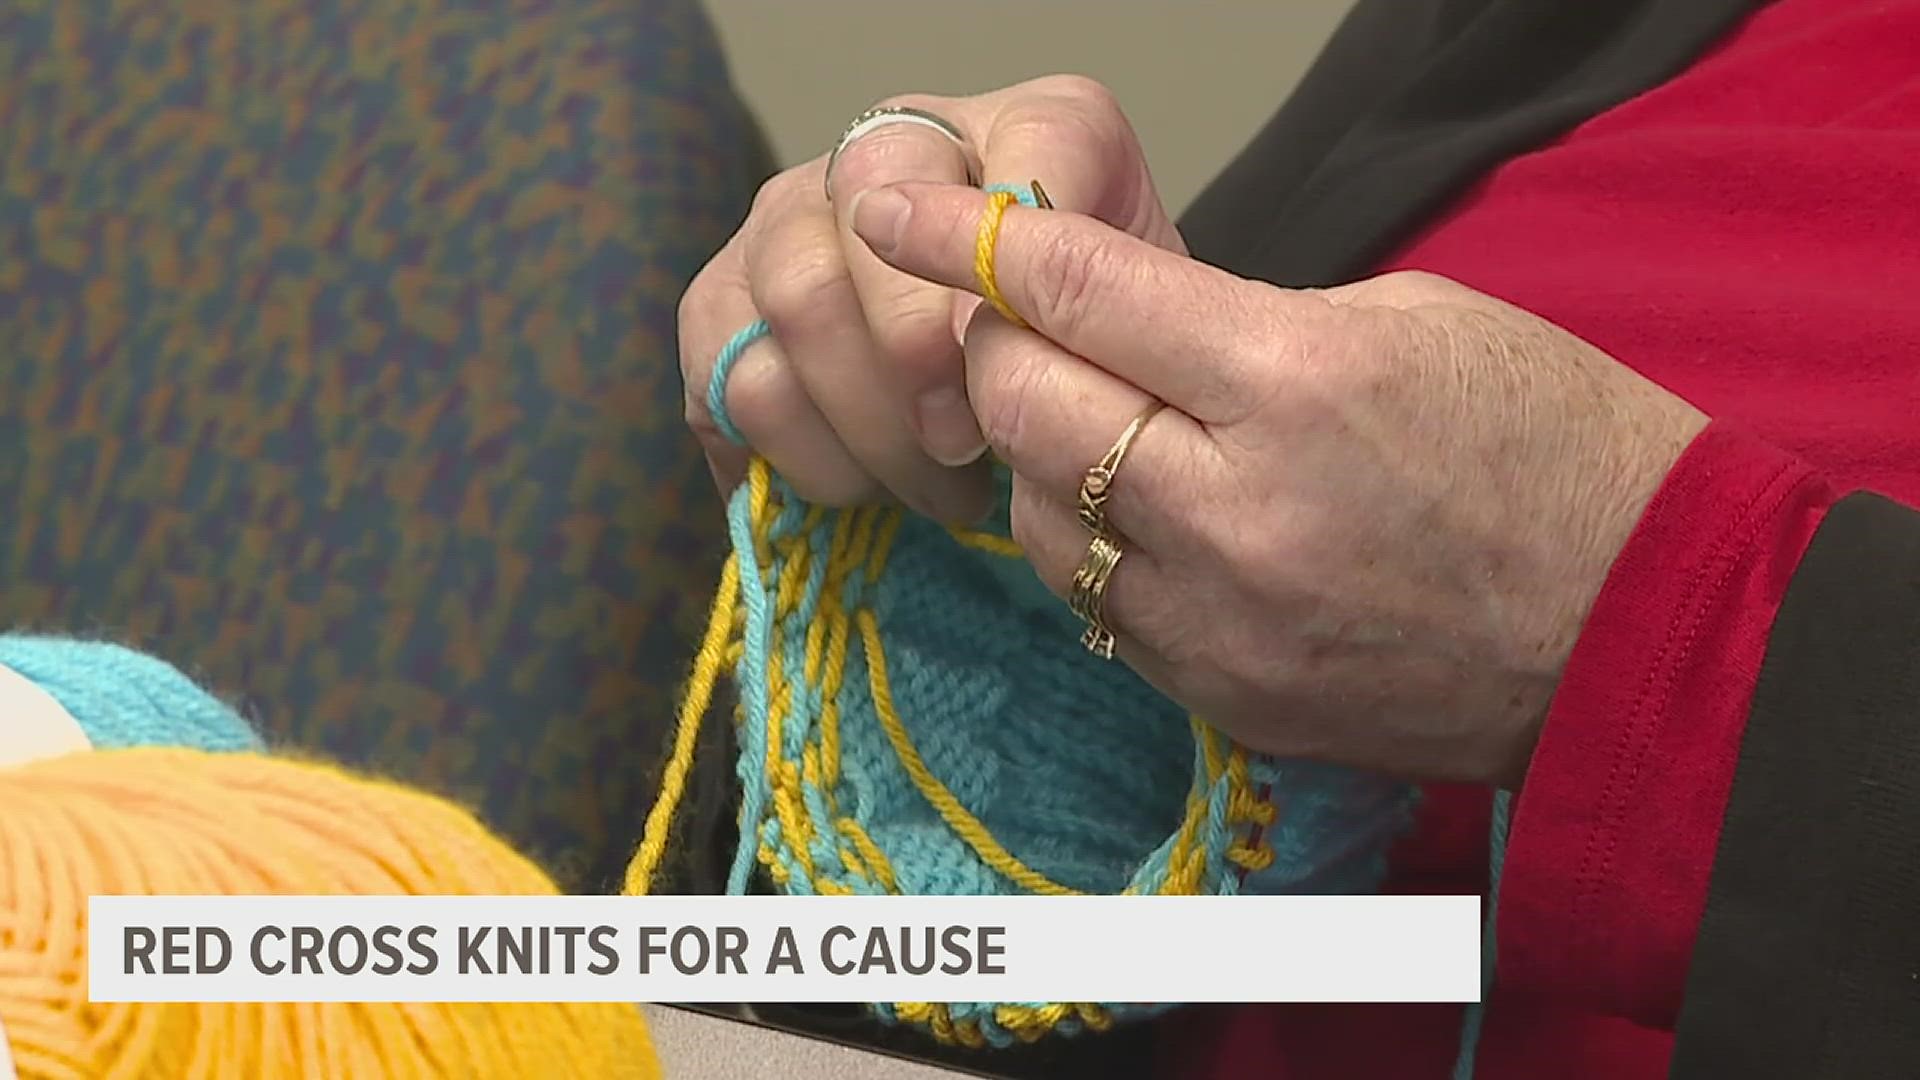 Since 2011, these Red Cross of the Quad Cities volunteers have knitted hats for military members and their families, especially focusing on homeless veterans.